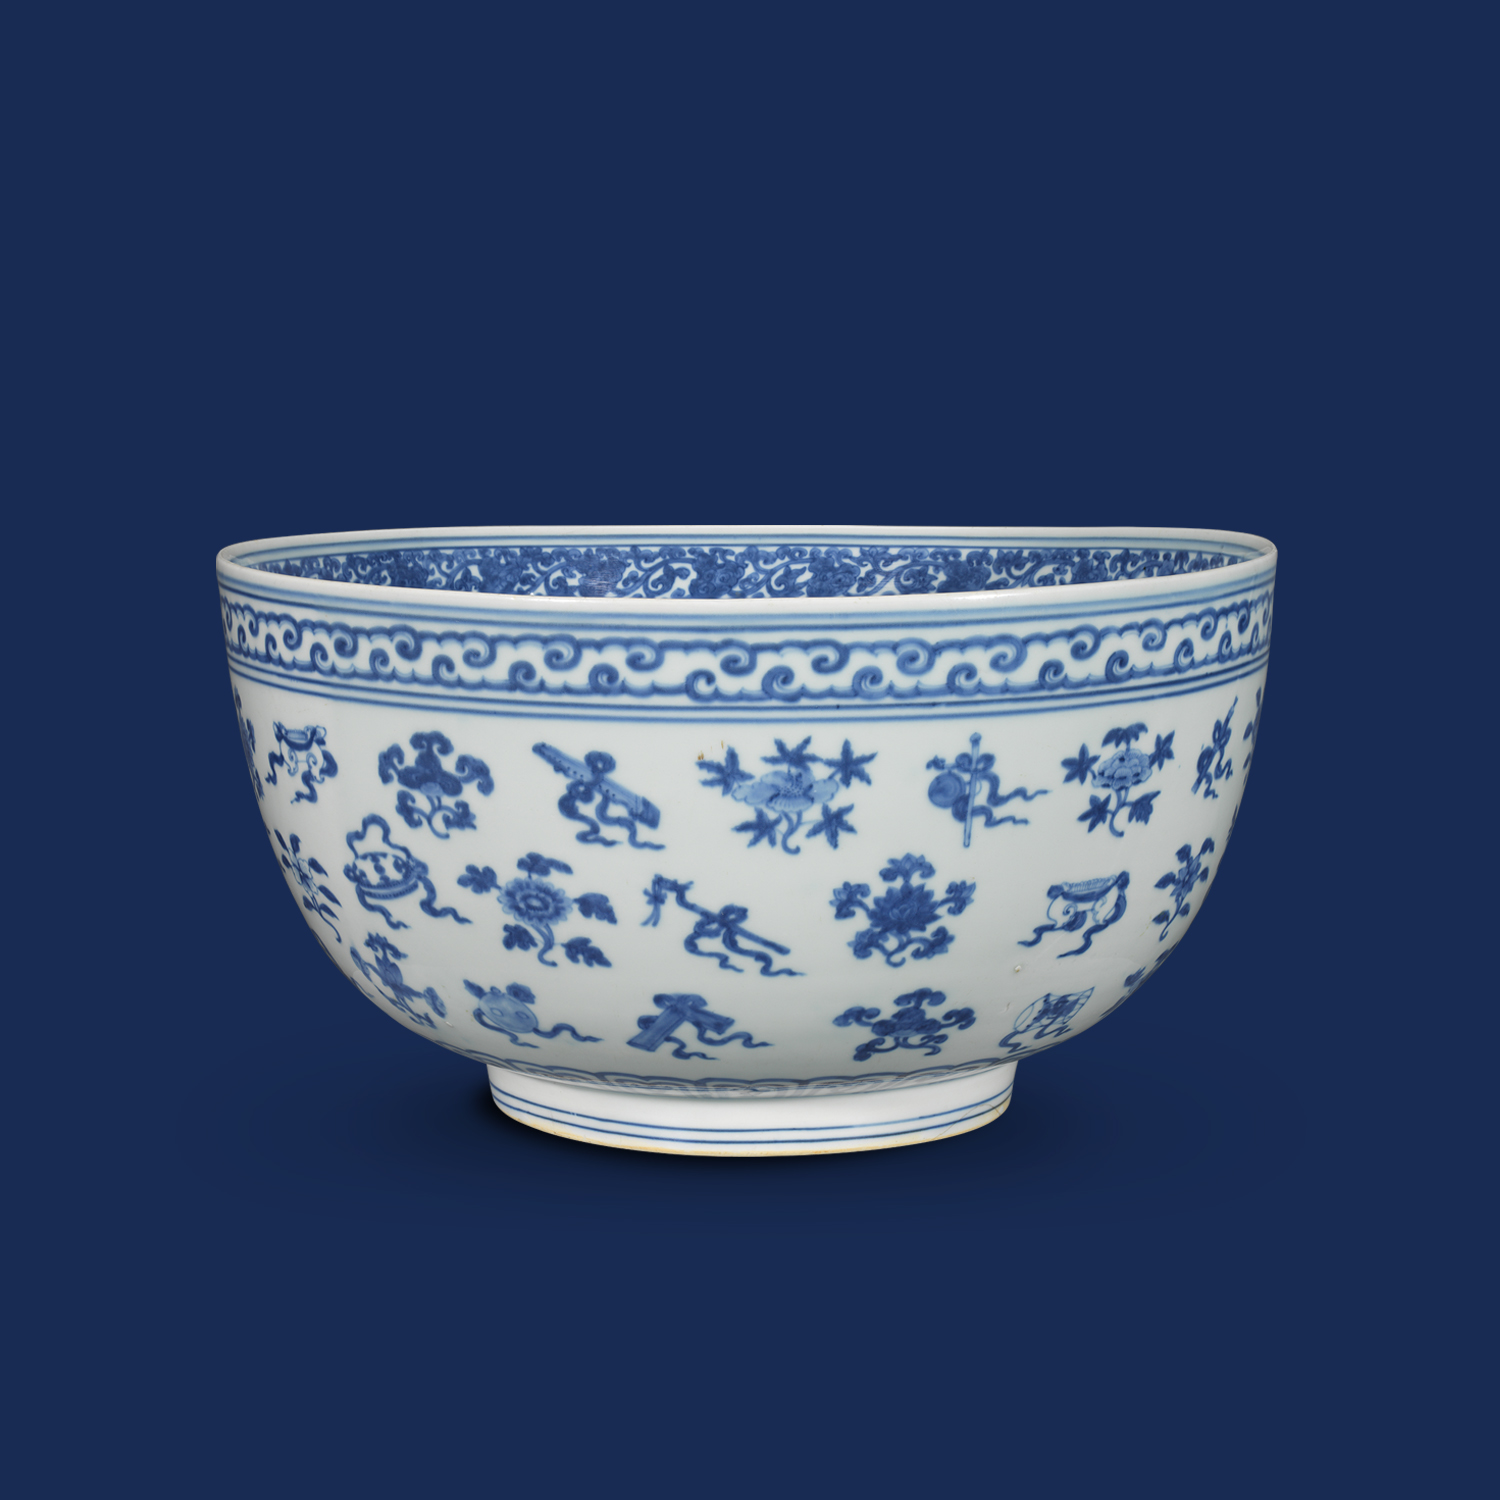 Large bowl with assorted musical instruments design in underglaze blue